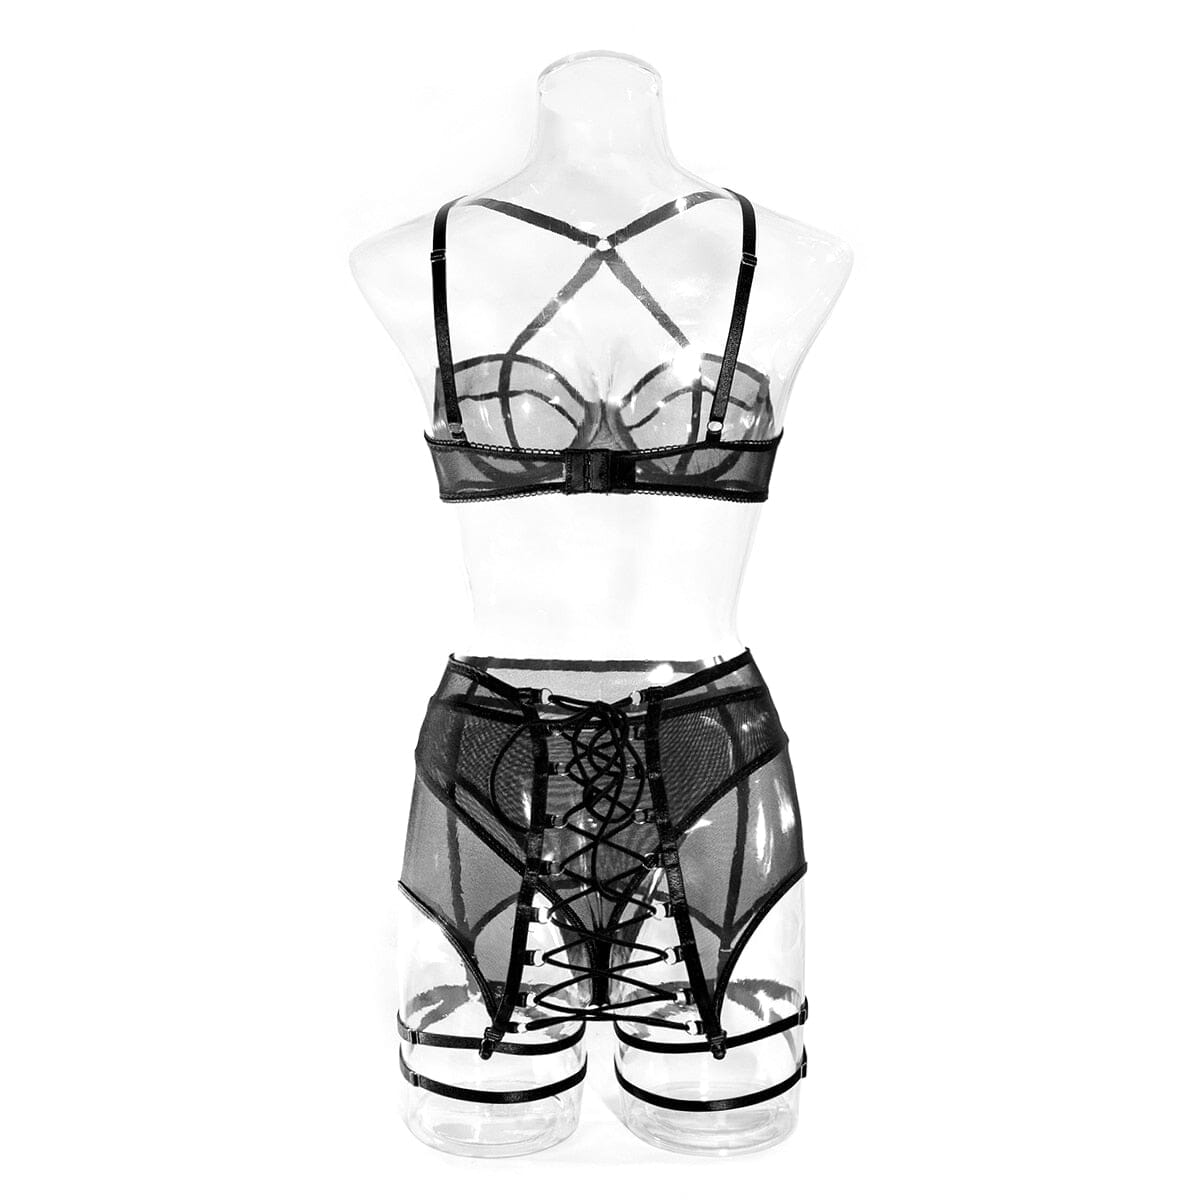 With Stockings Transparent Bra Intimate 3-Piece Black Lingerie Accessories BlissGown 